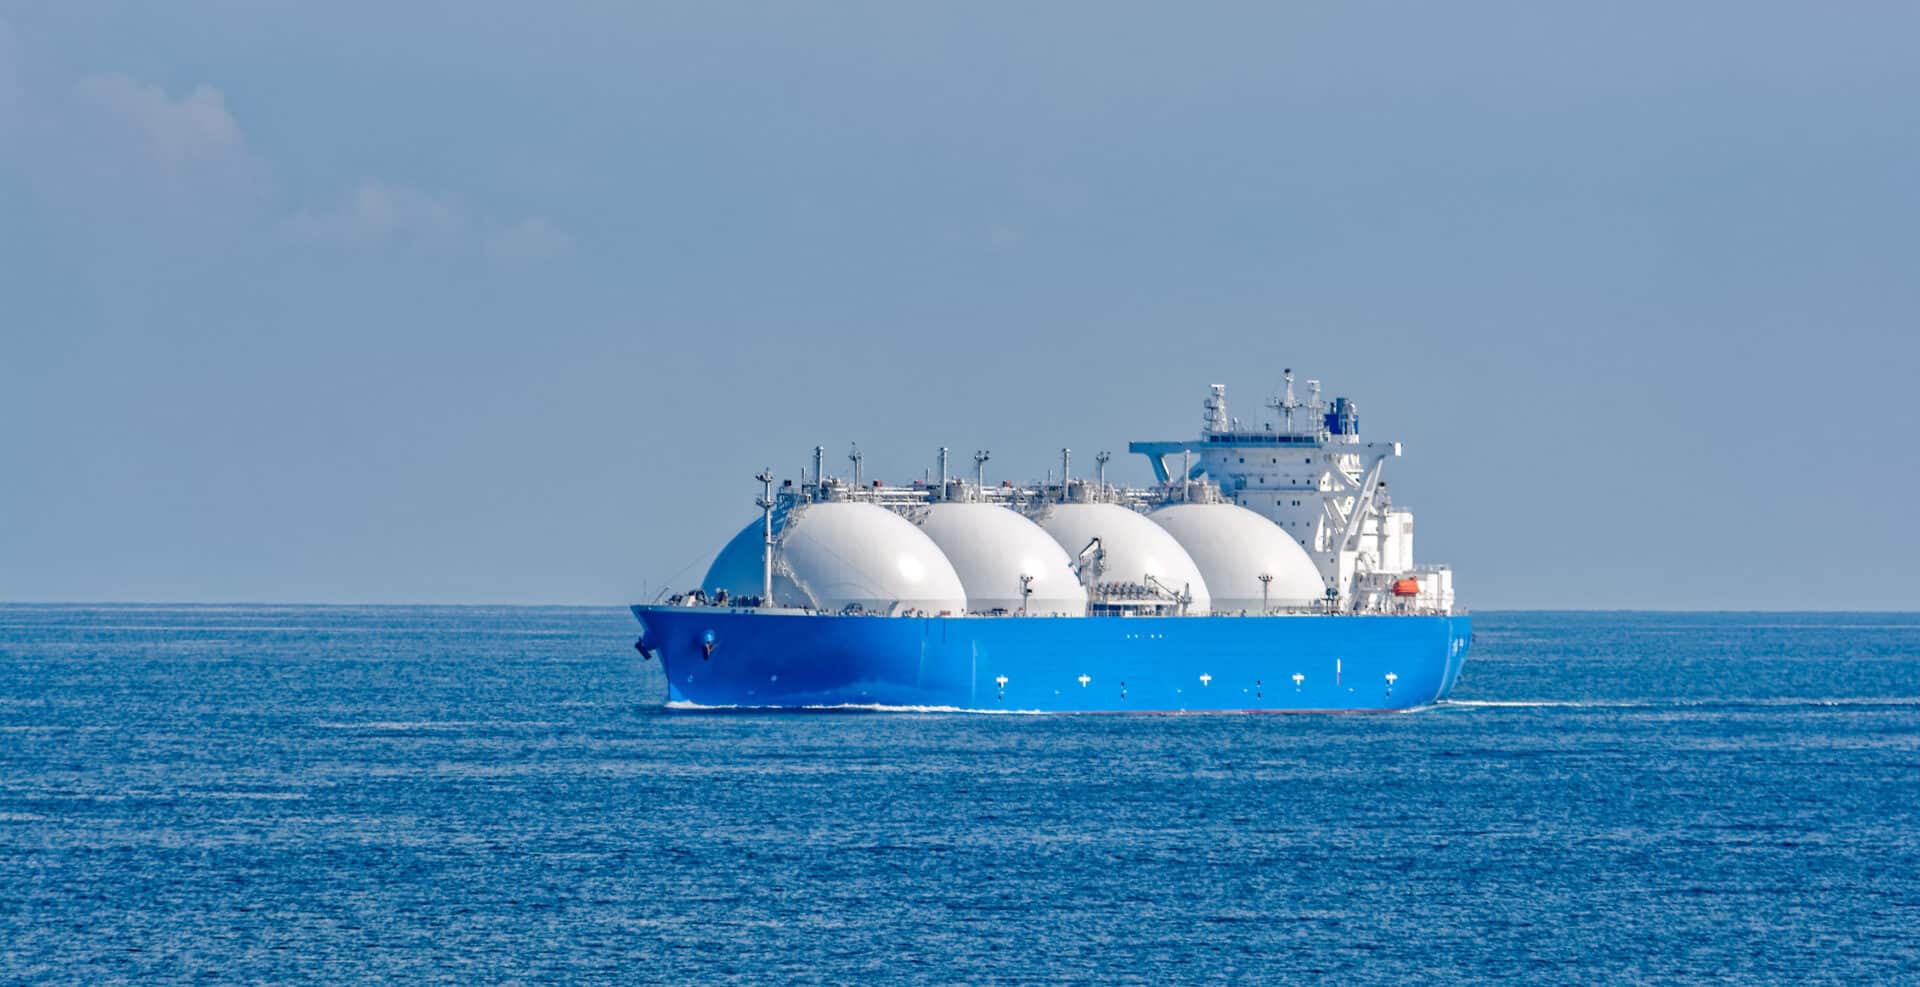 A tanker ship outfitted for transporting LNG is shown on the open sea.